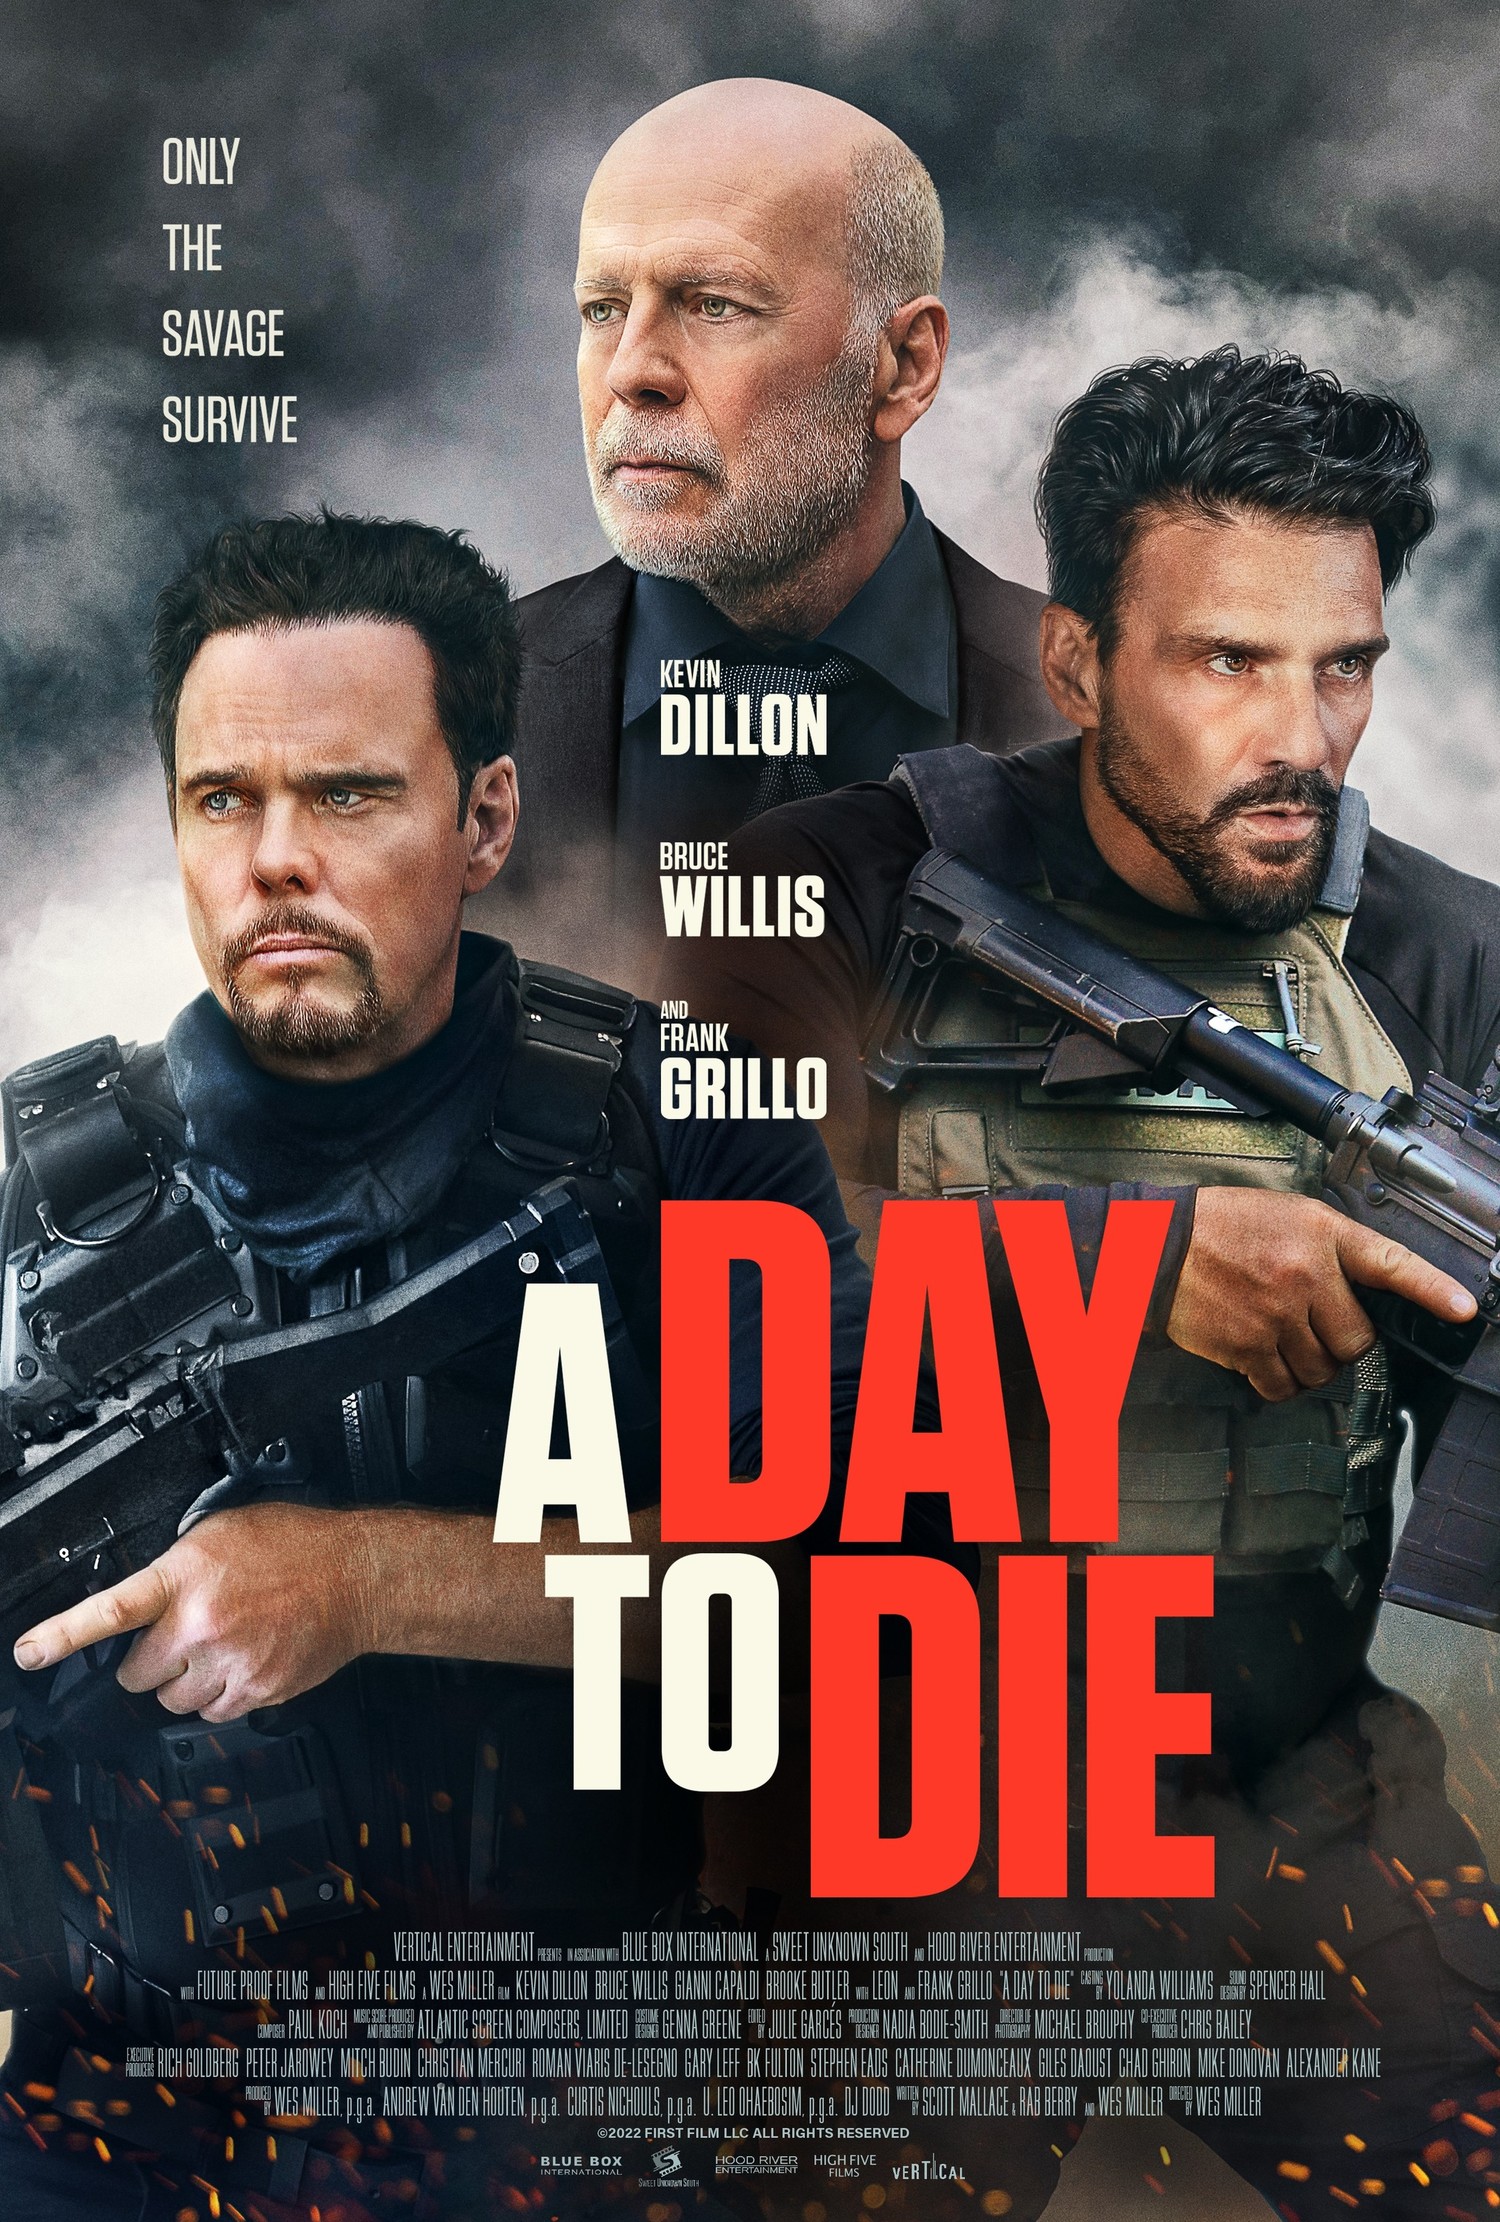 A DAY TO DIE